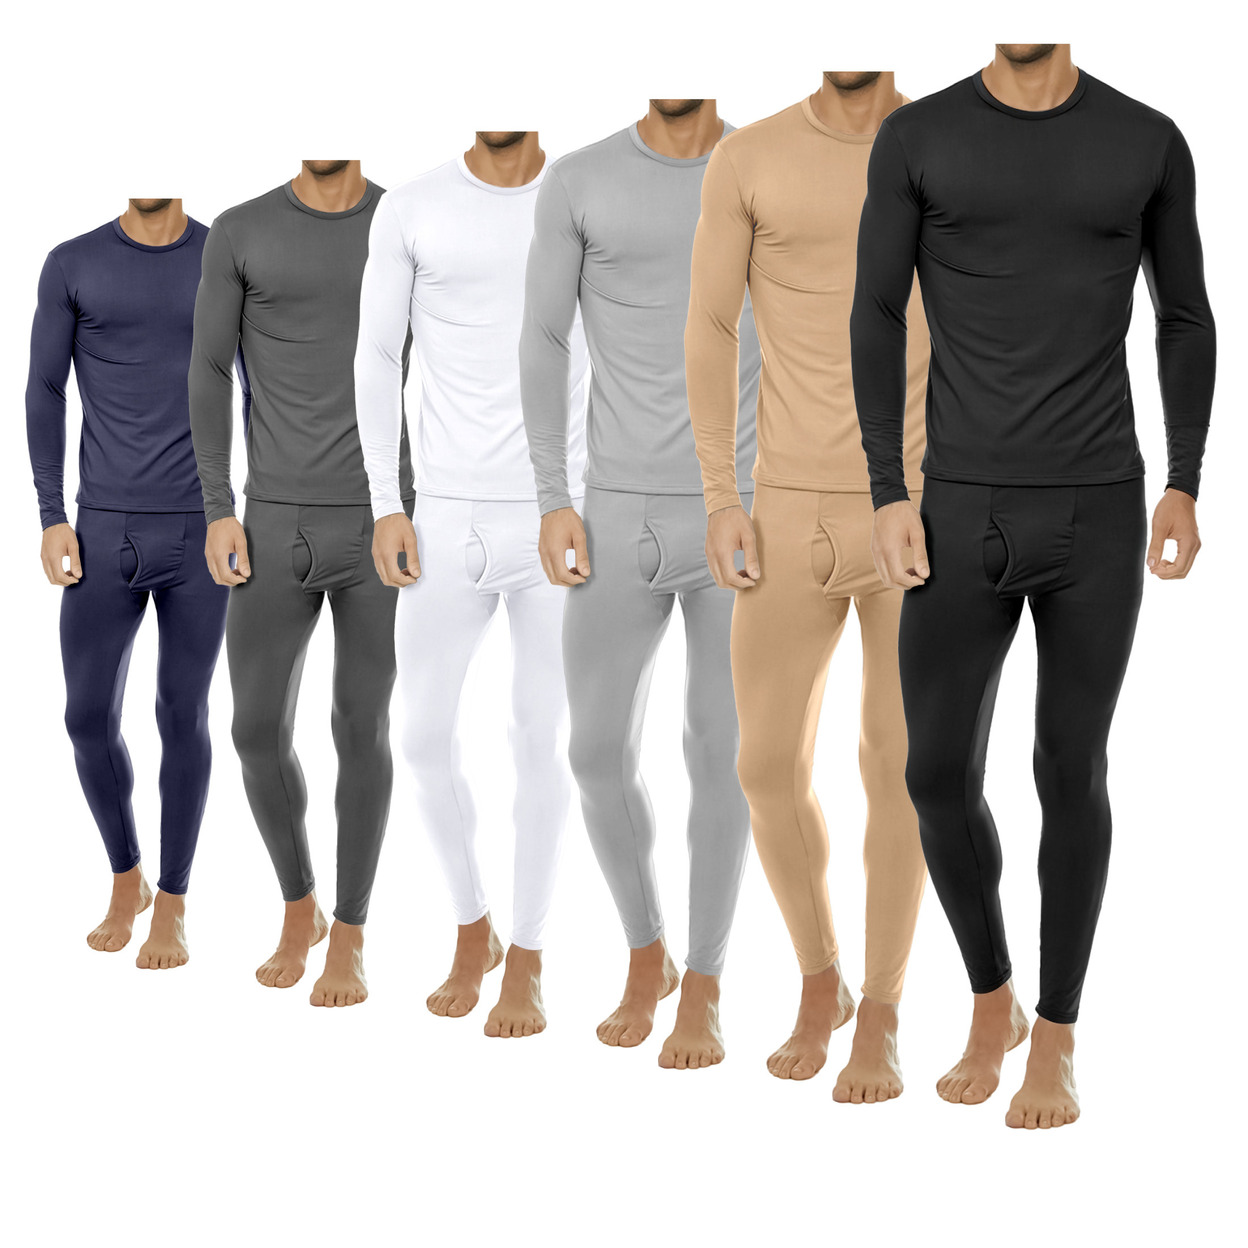 2-Sets: Men's Winter Warm Fleece Lined Thermal Underwear Set For Cold Weather - White&navy, Large